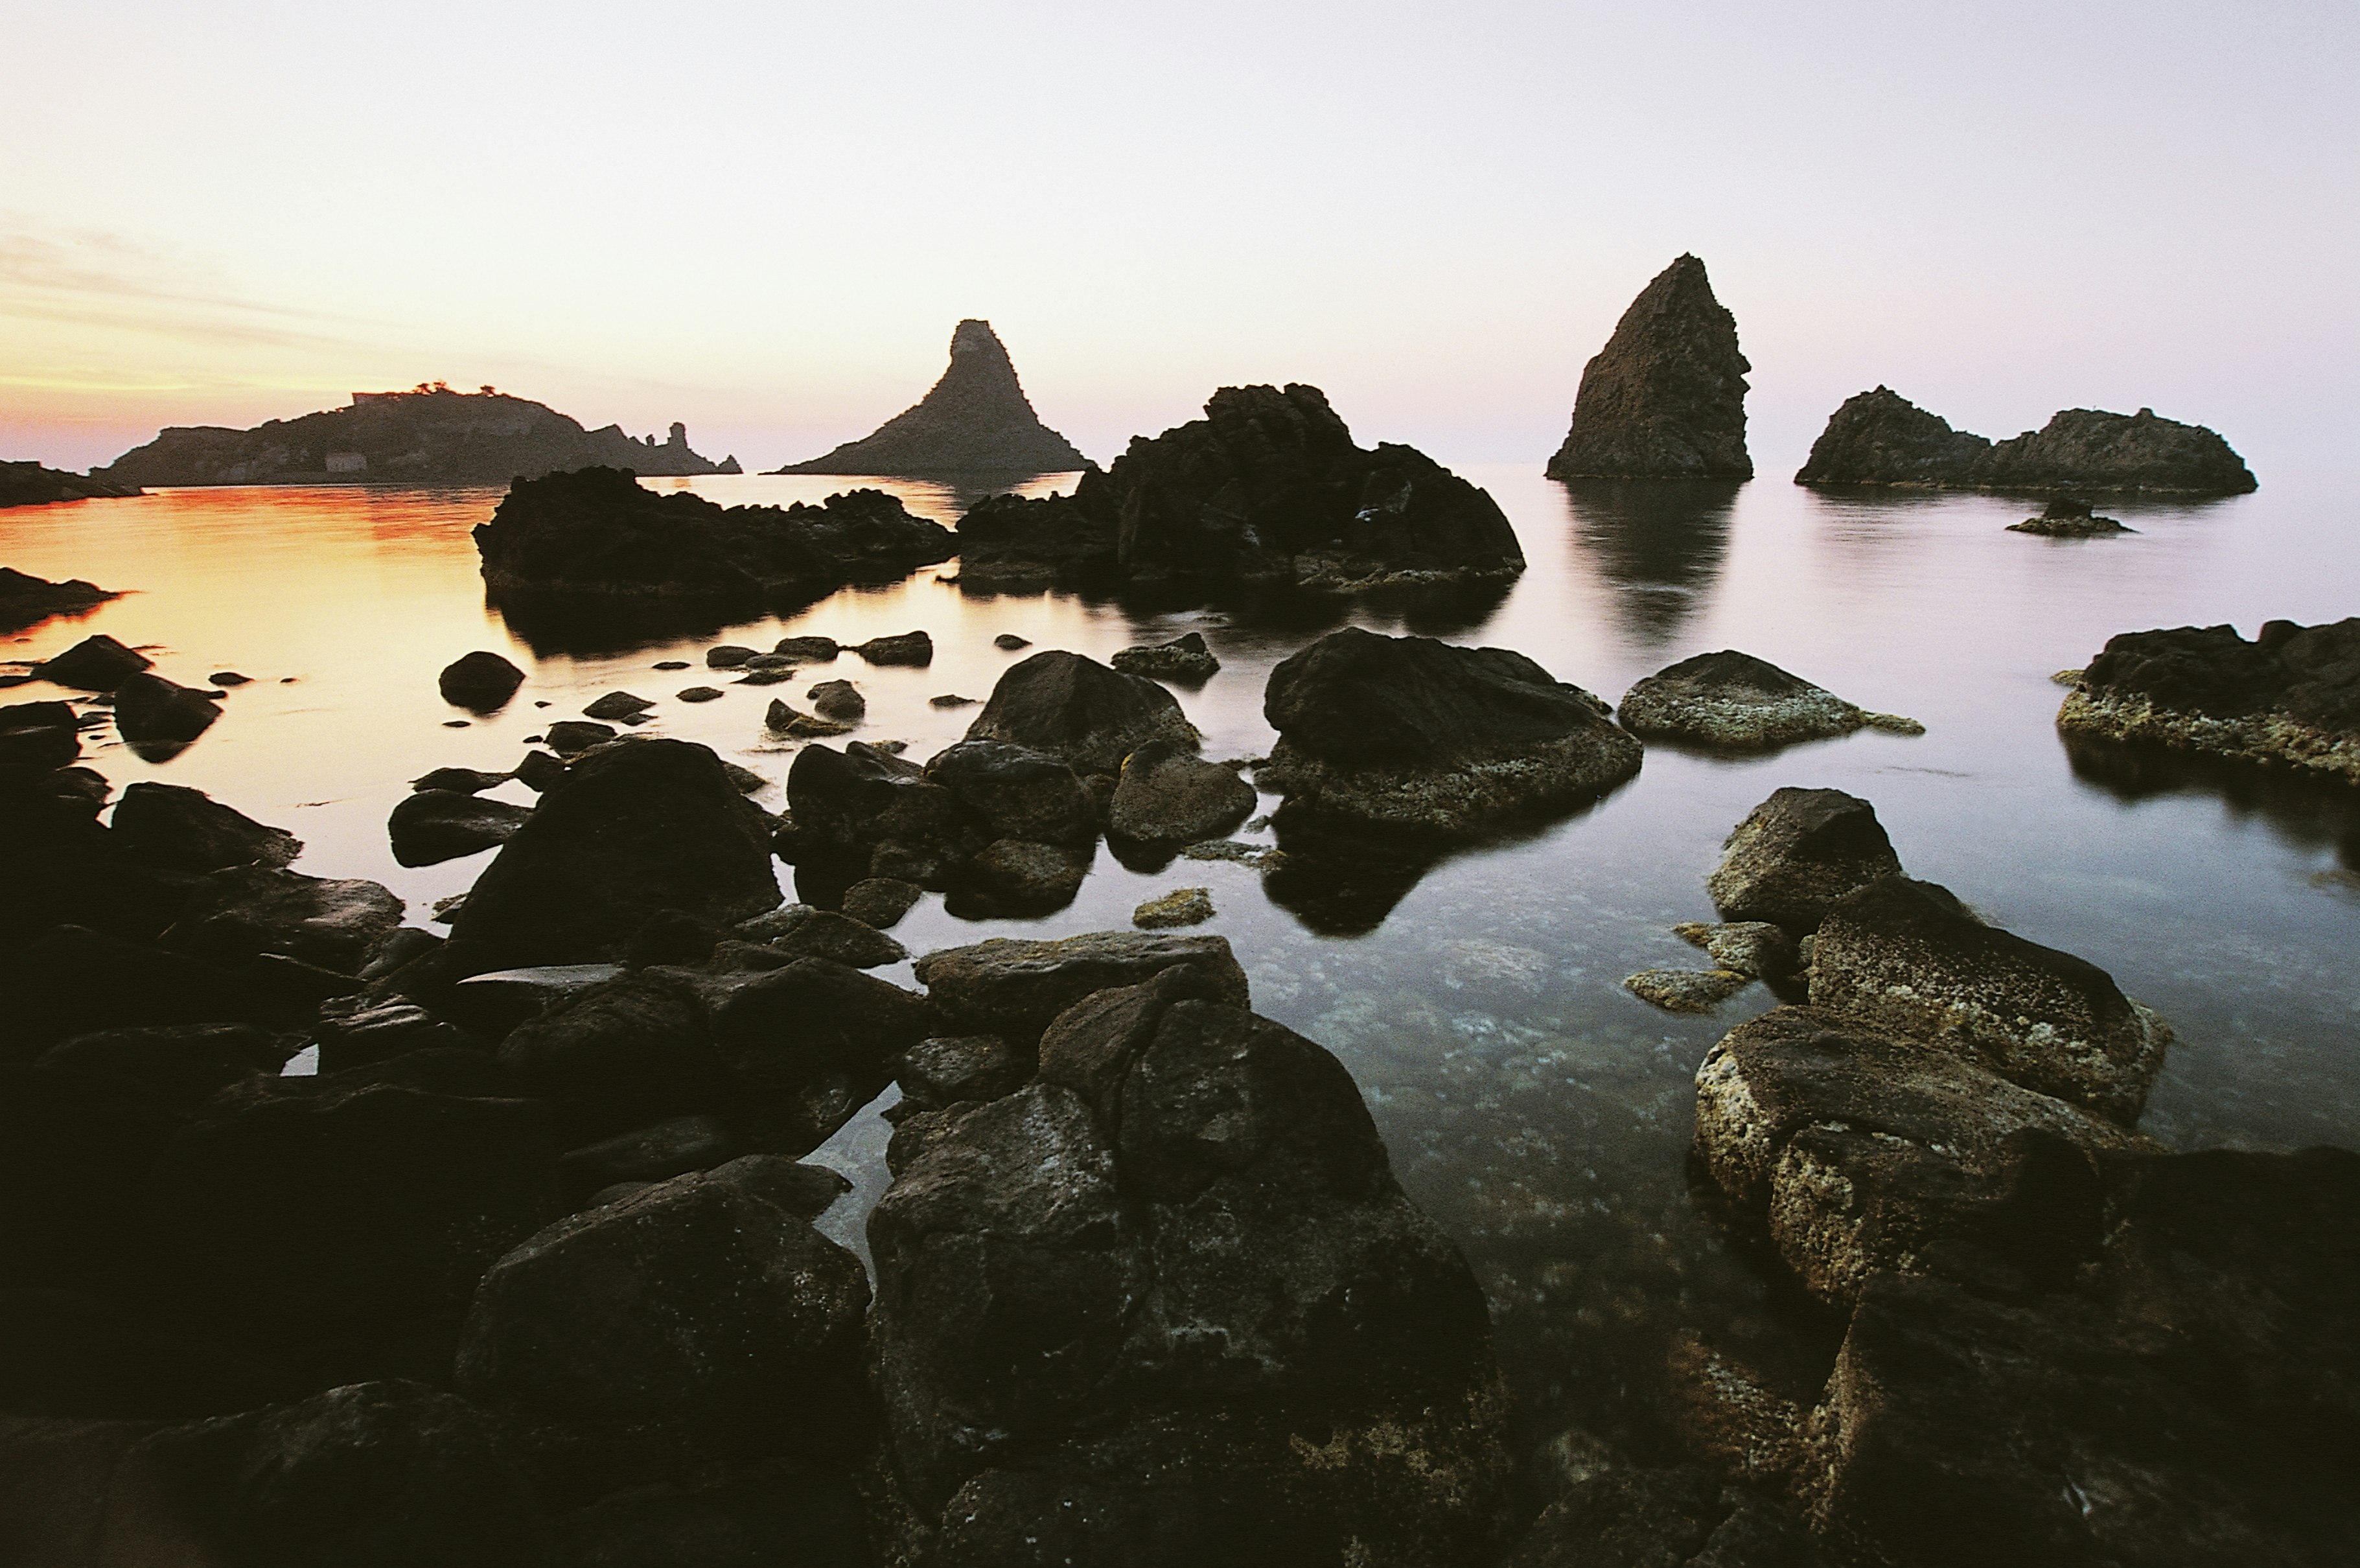 The sun sets creating a deep orange glow on the water on the left side of the frame contrasting with the cooler, pastel tones and dark grey of the basaltic rocks pointing out of the ocean